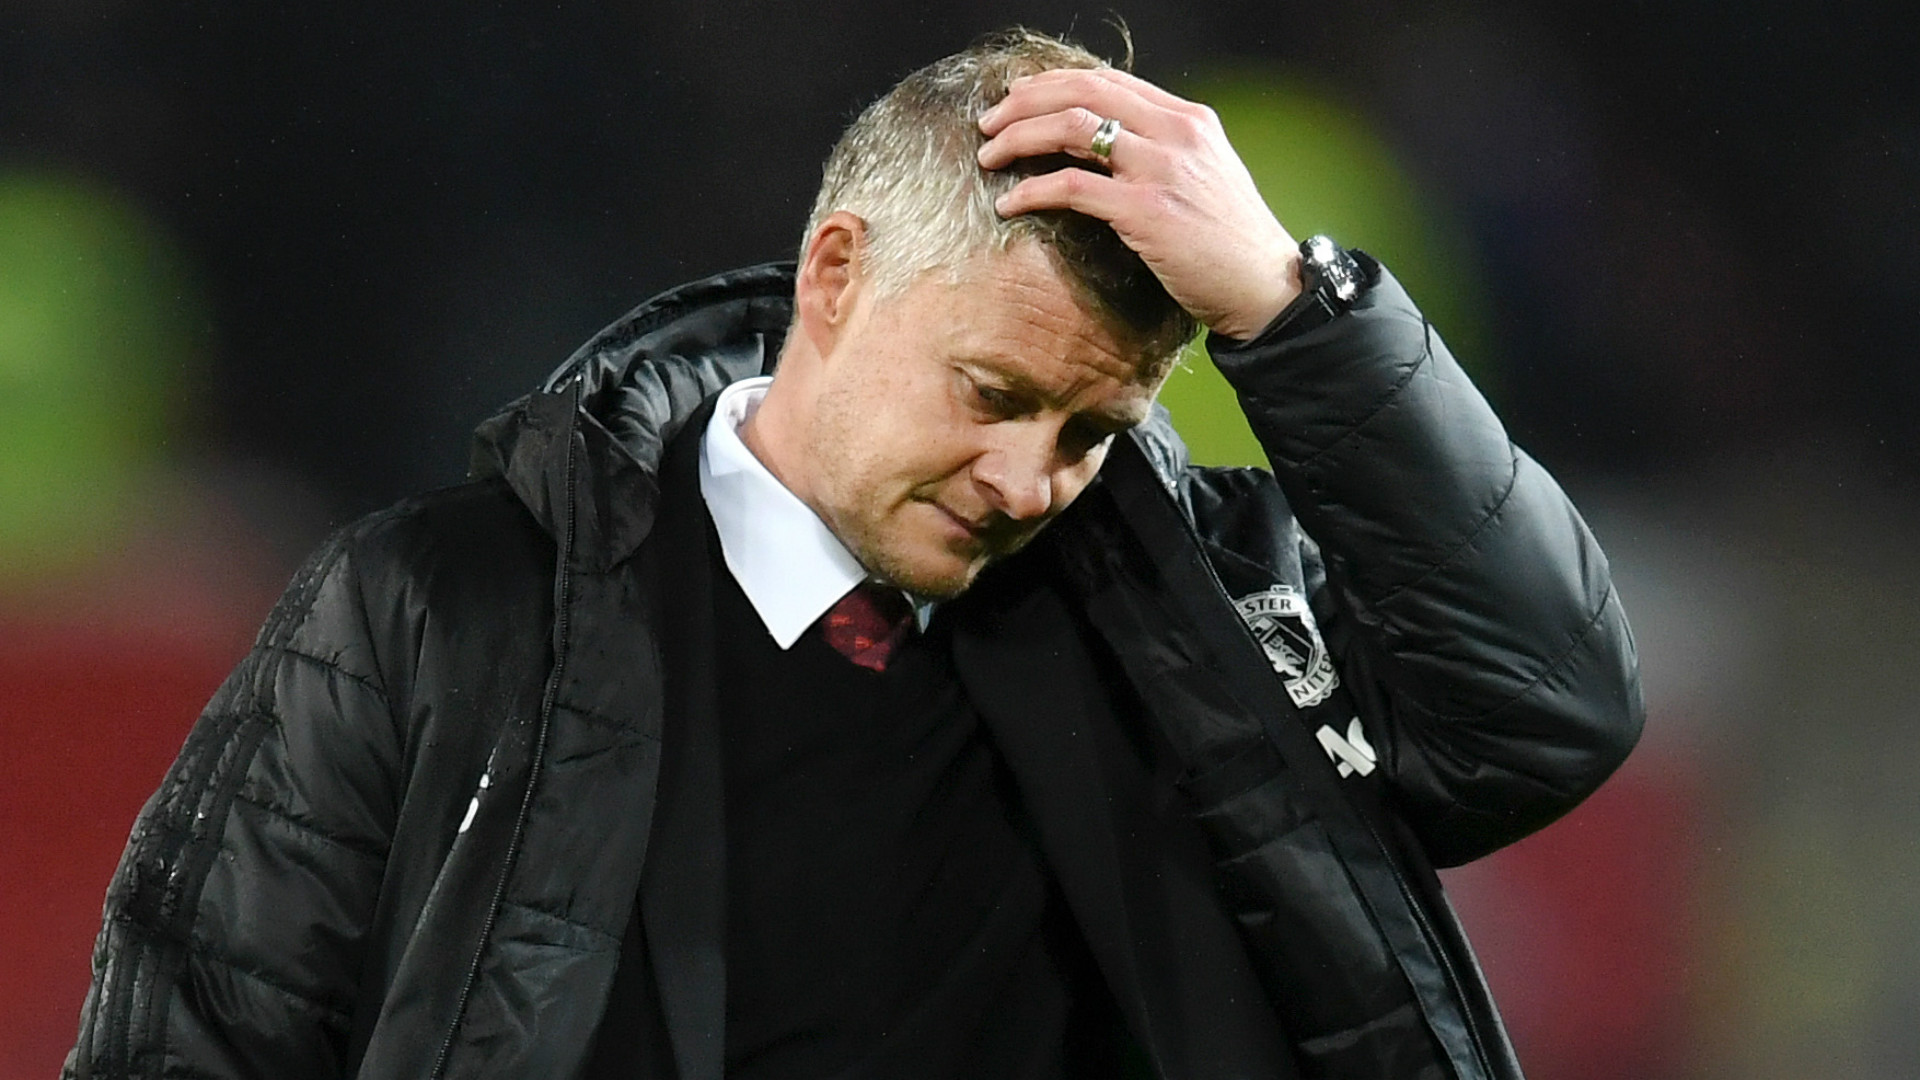 Will Ole Gunnar Solskjaer stay Manchester United's manager?